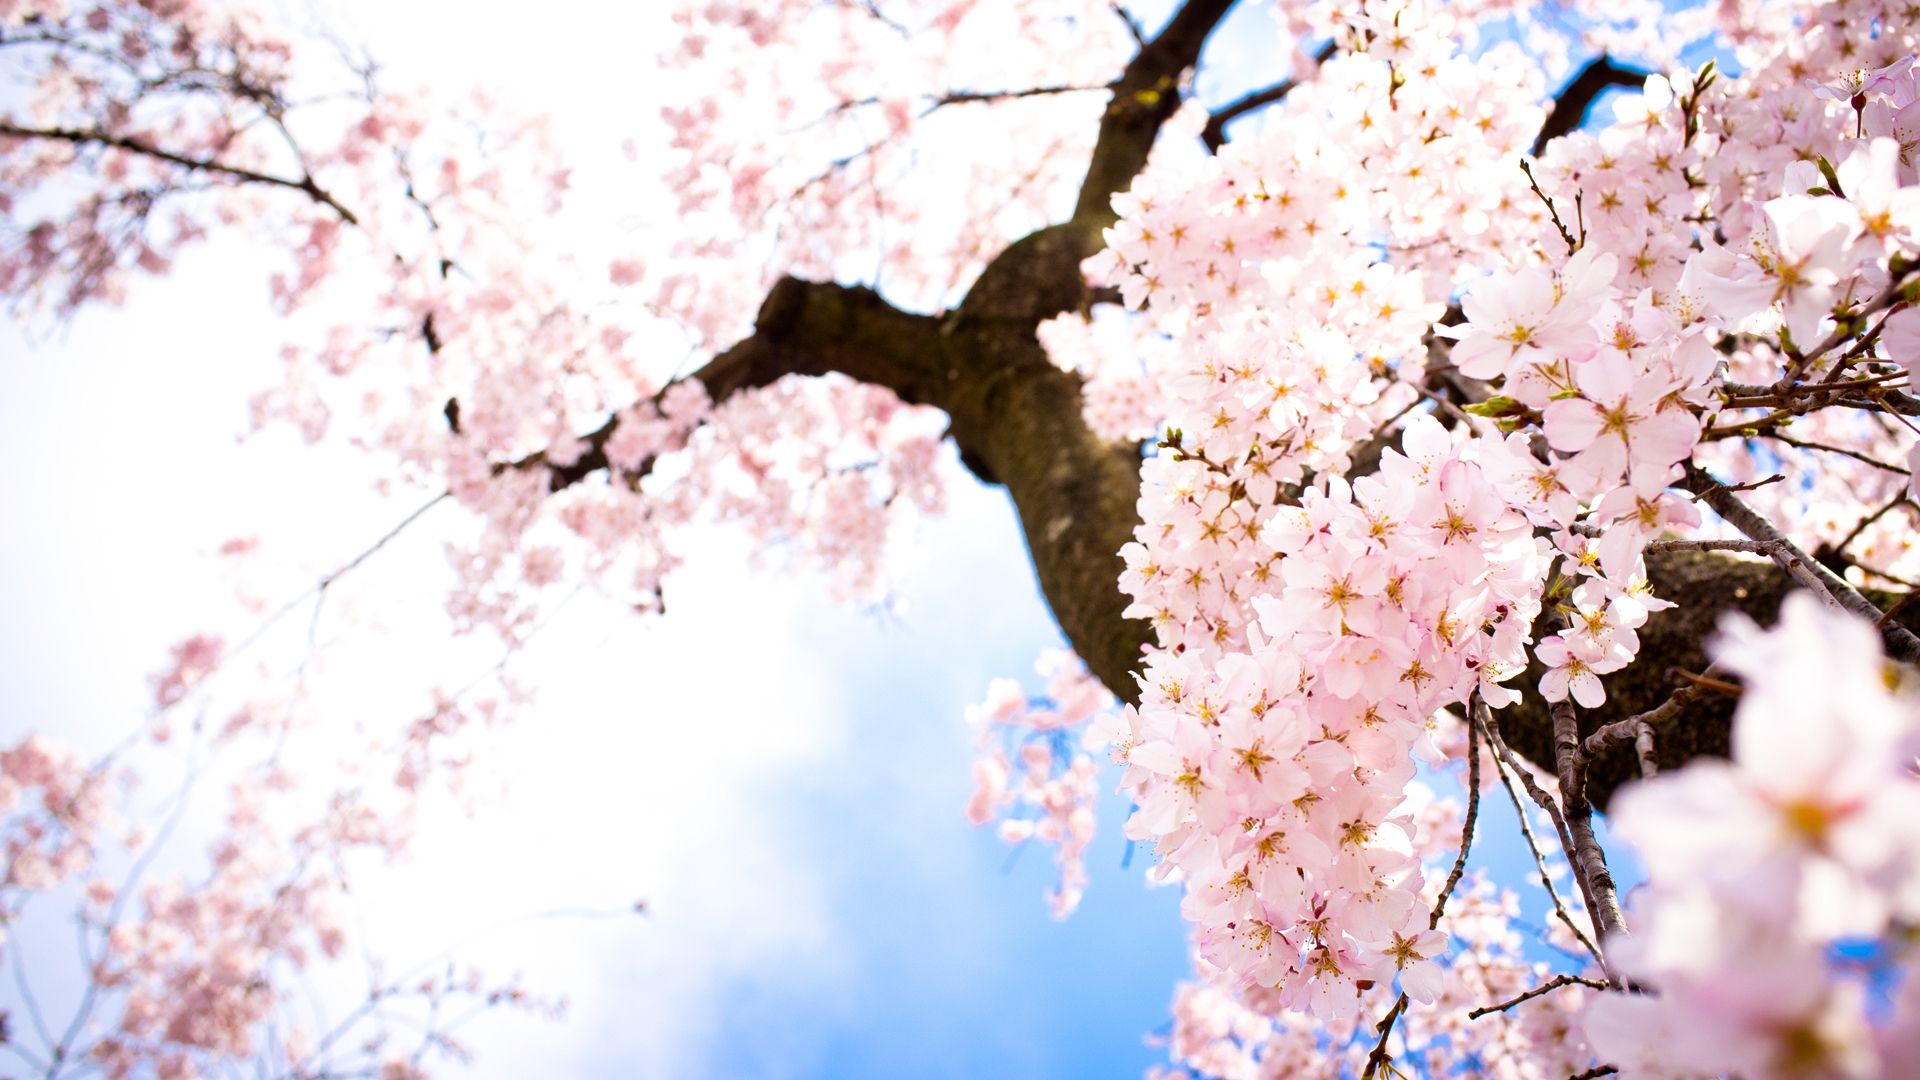 Free download Beautiful Pink Cherry Blossom Wallpaper Colors Photo 34590472 [1920x1280] for your Desktop, Mobile & Tablet. Explore Anime Cherry Blossom Wallpaper. Cherry Blossom Picture Wallpaper, Japanese Cherry Blossom